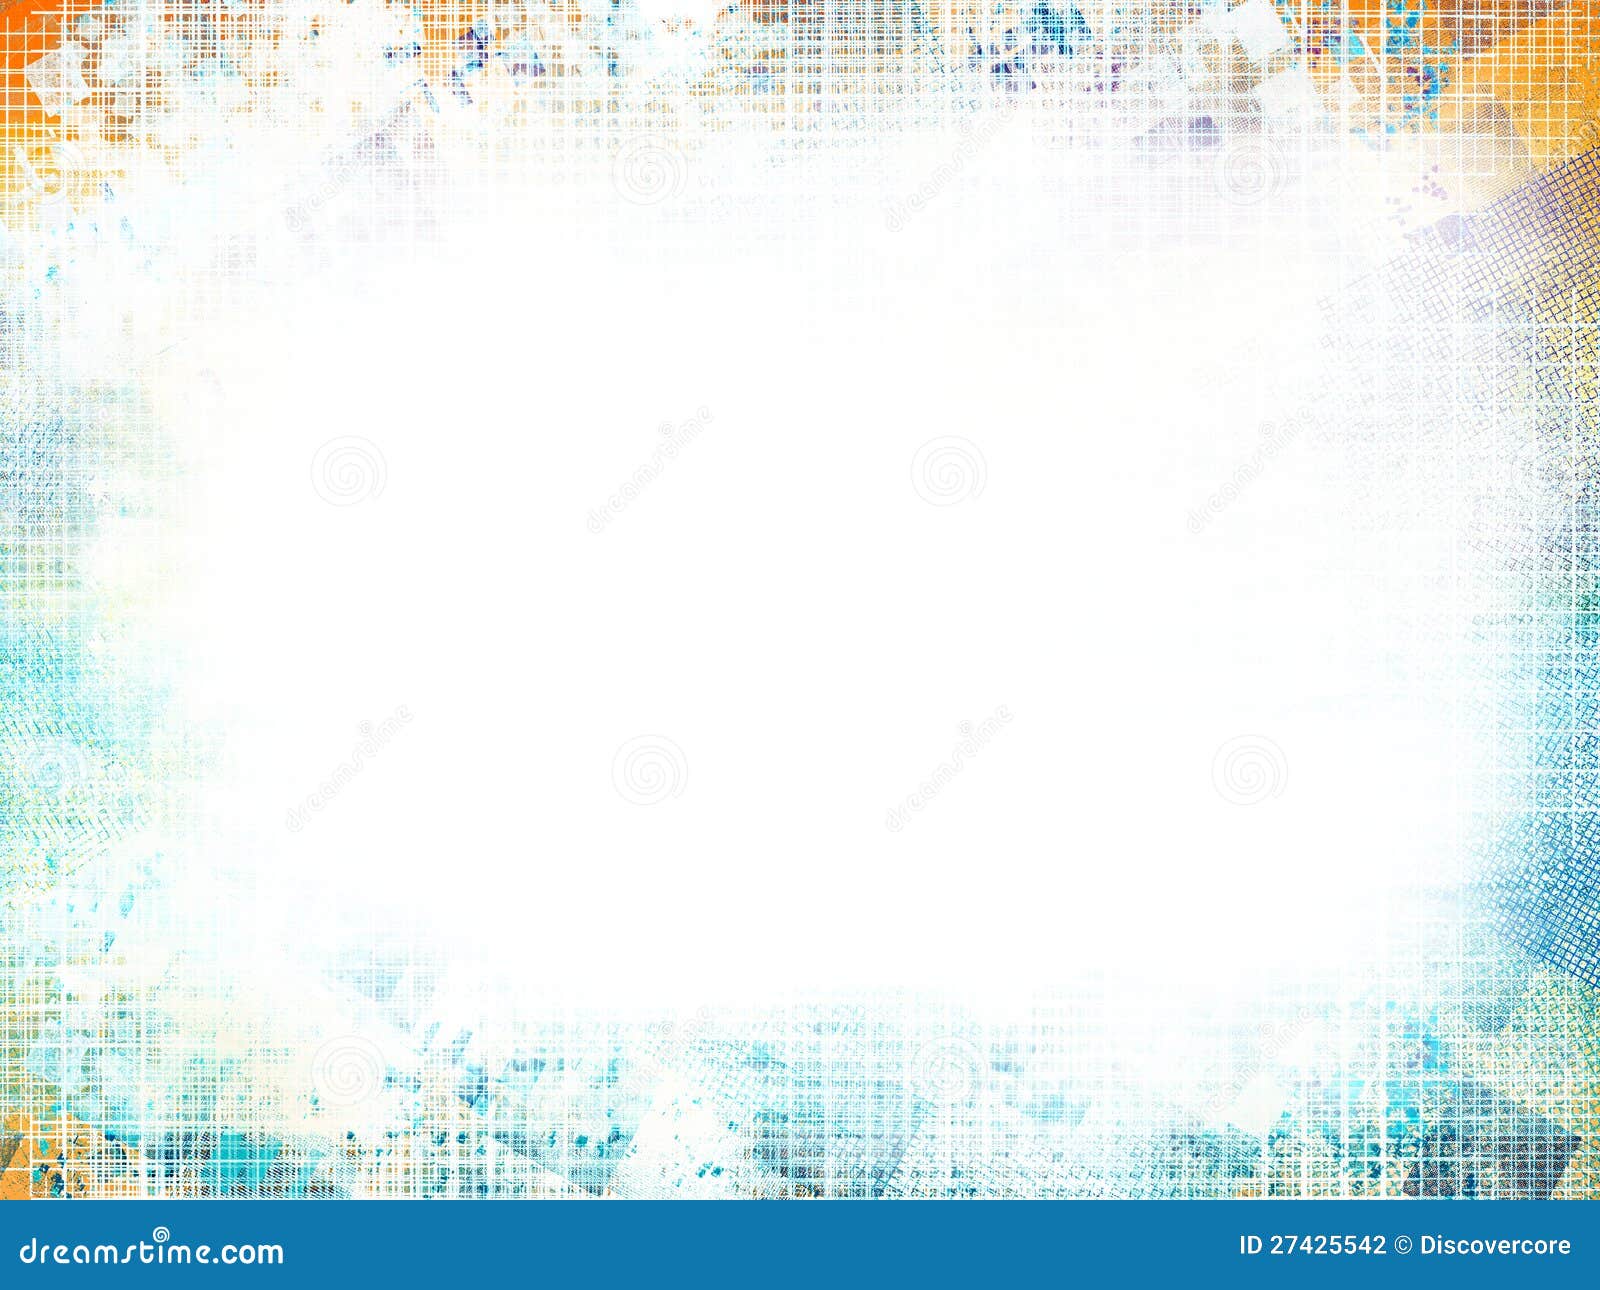 abstract frame background 27425542